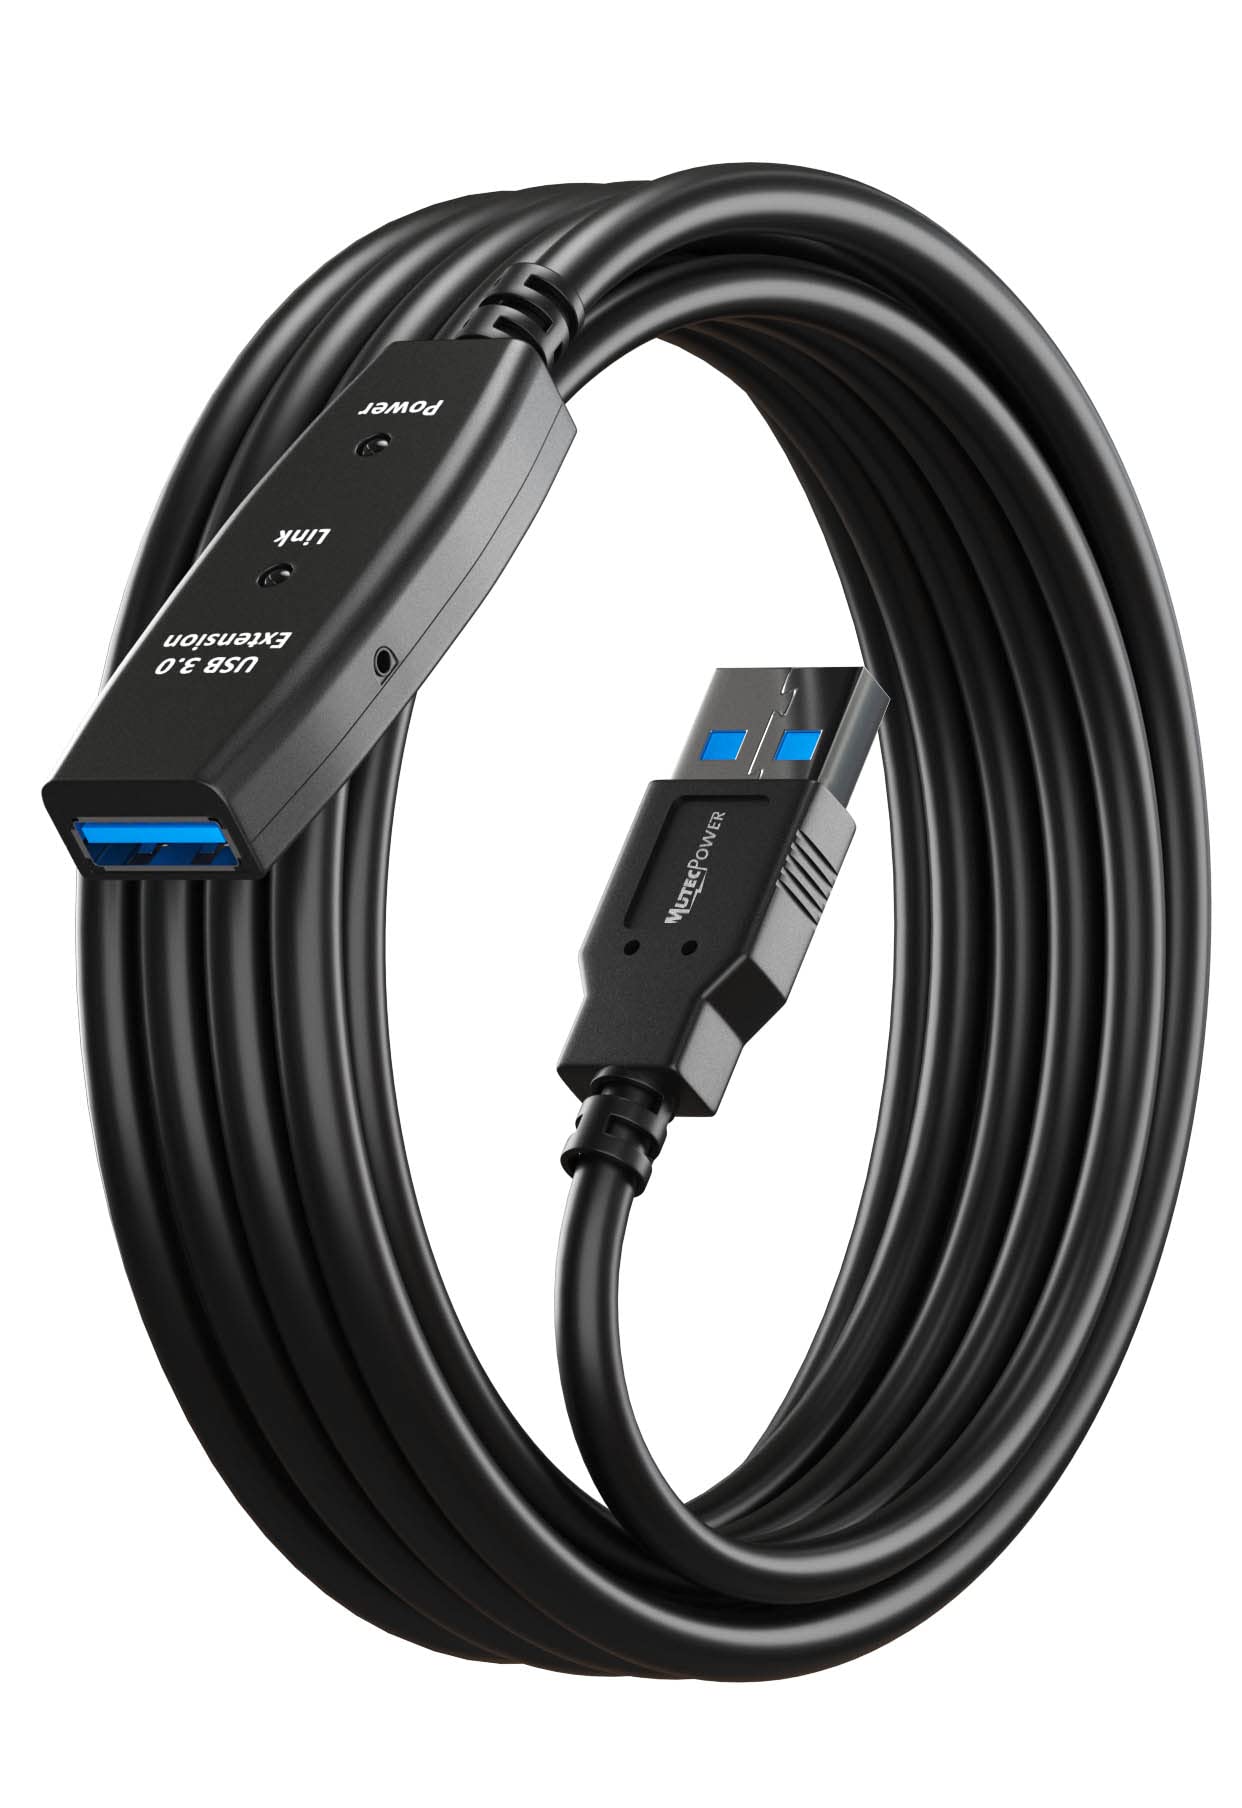 MutecPower 100 Feet Active USB Extension Cable 3.0 Male to Female with 3 Extension chipsets Signal Booster - Active Extension/Repeater Cord 30 Meters / 100 Feet (AC Power Supply Included)